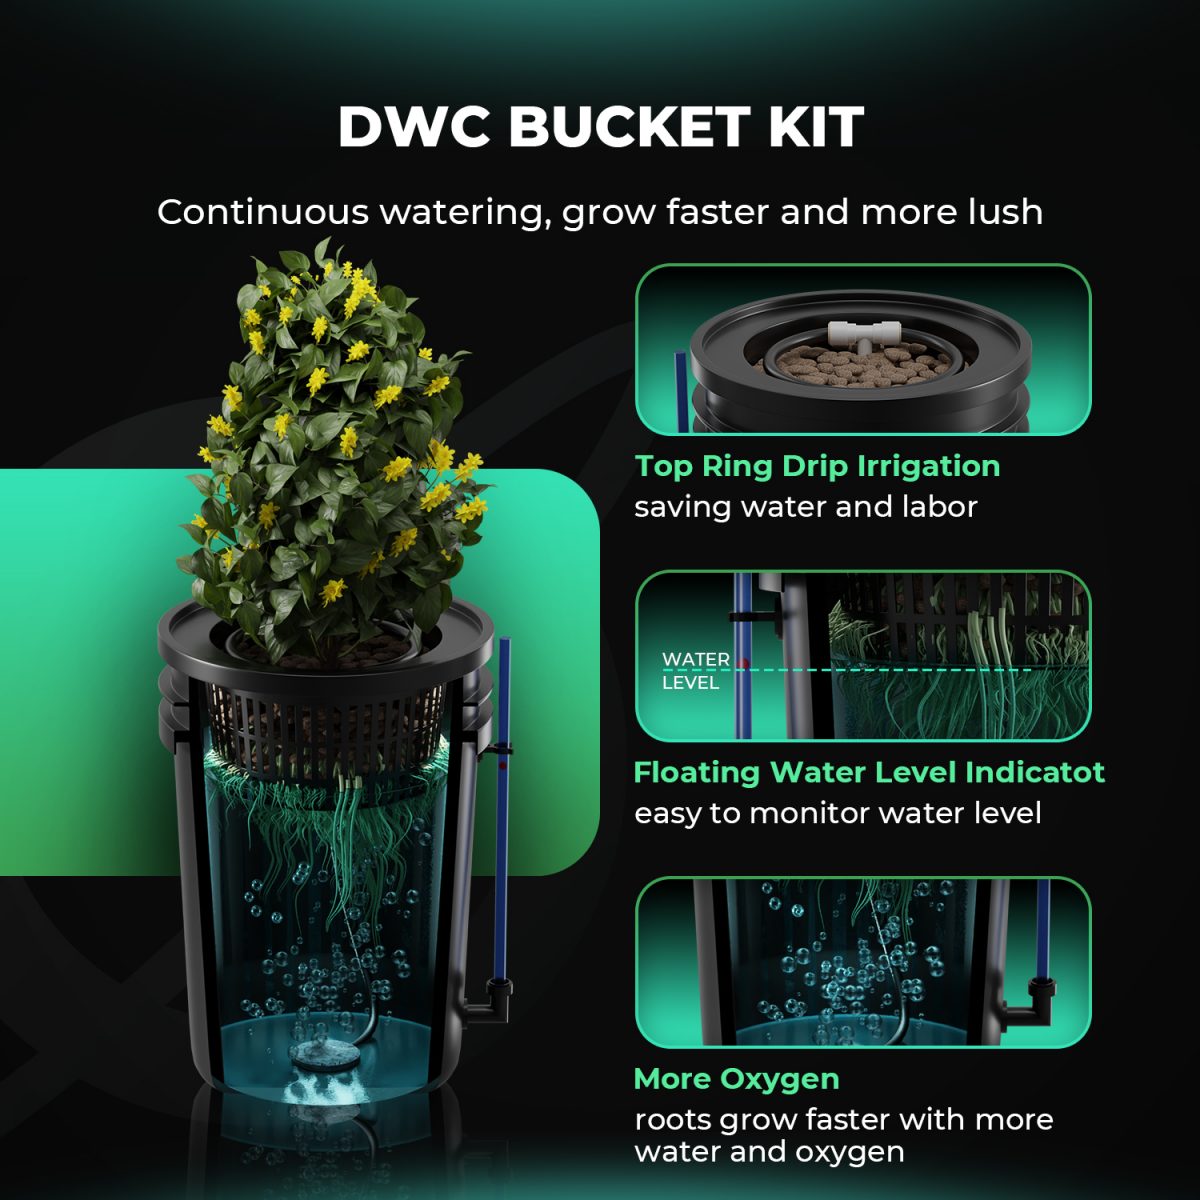 DWC BUCKET KIT Continuous watering grow faster and more lush